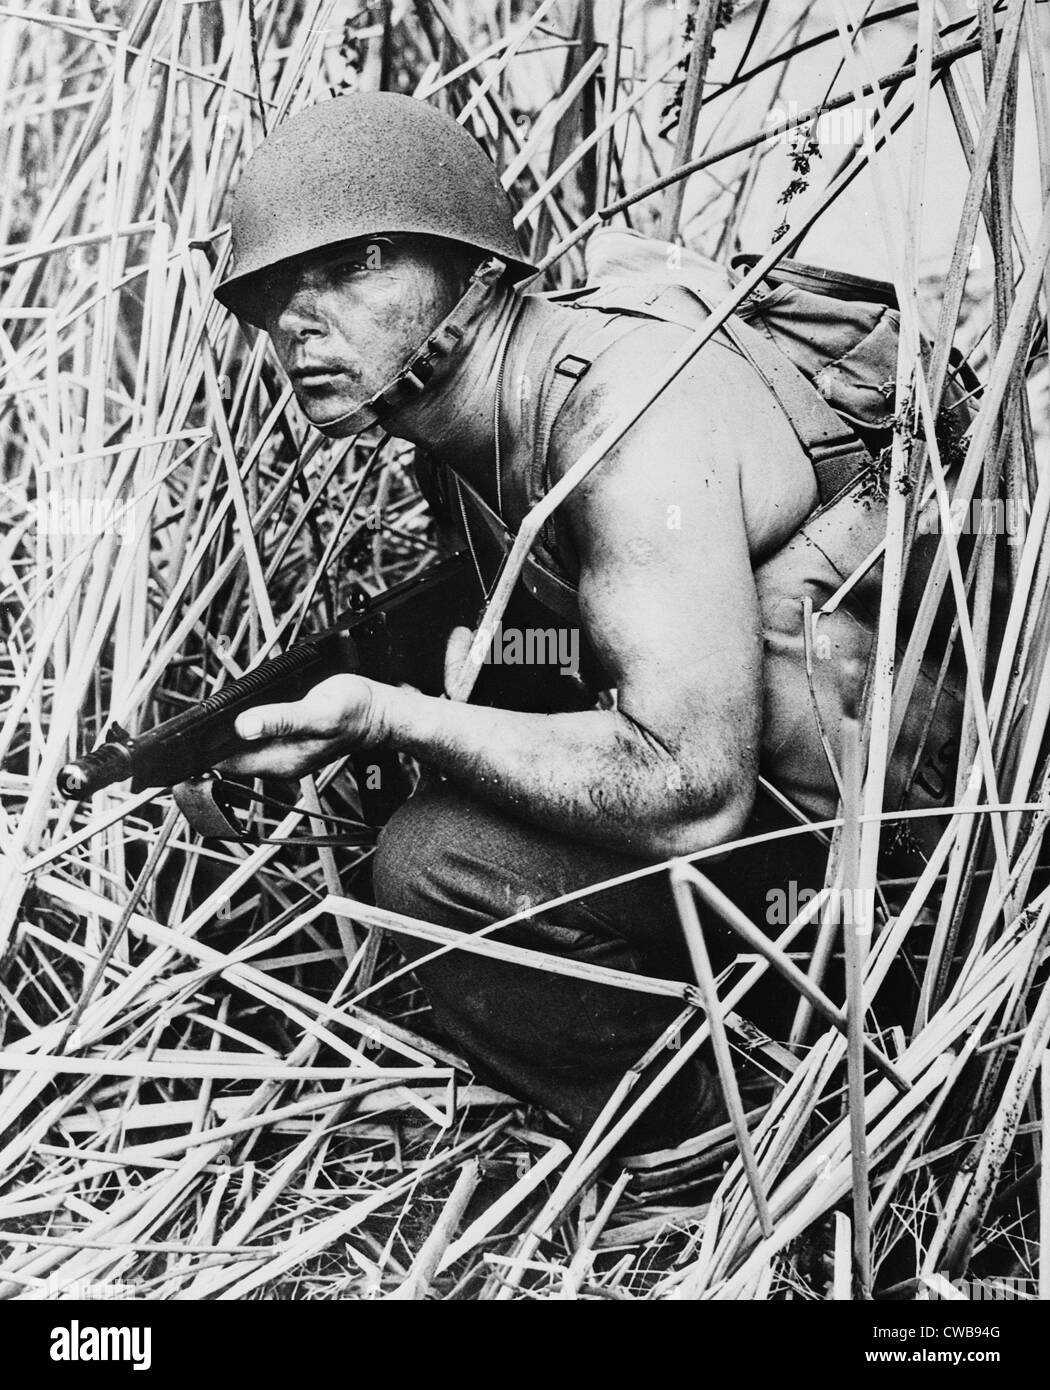 Soldier in grass, circa early 1940s. Stock Photo